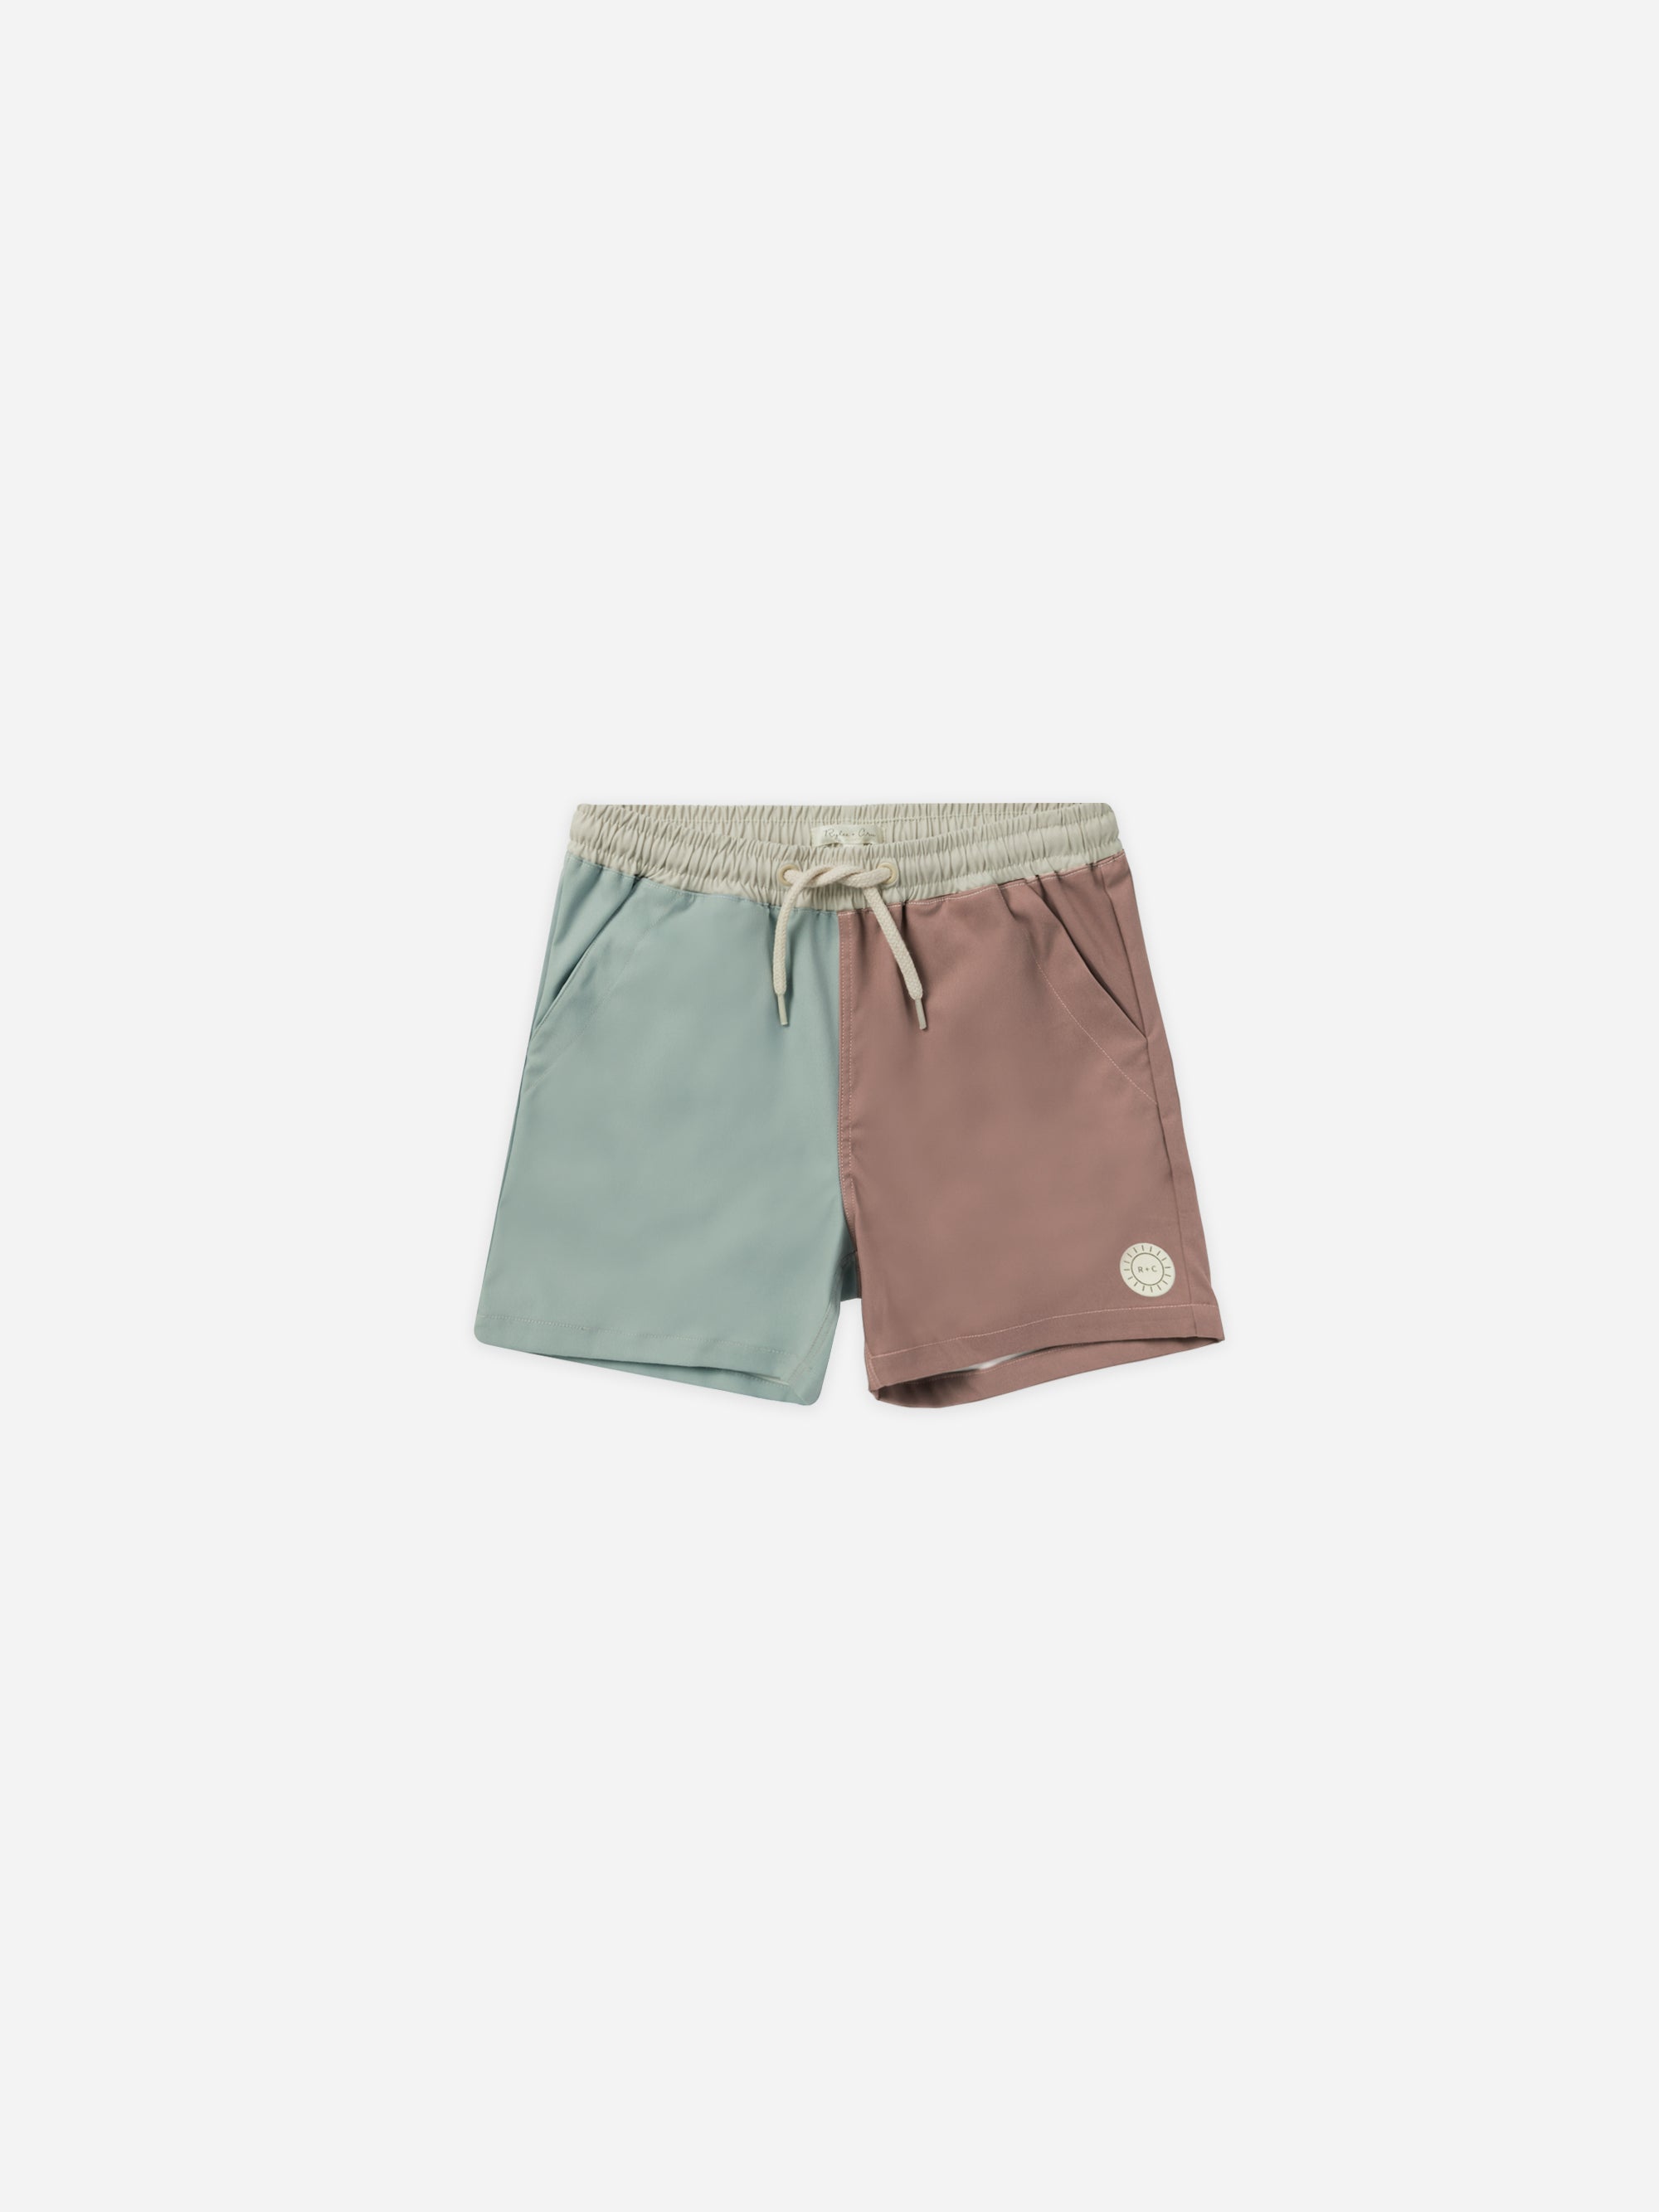 Boardshort || Mulberry - Rylee + Cru | Kids Clothes | Trendy Baby Clothes | Modern Infant Outfits |